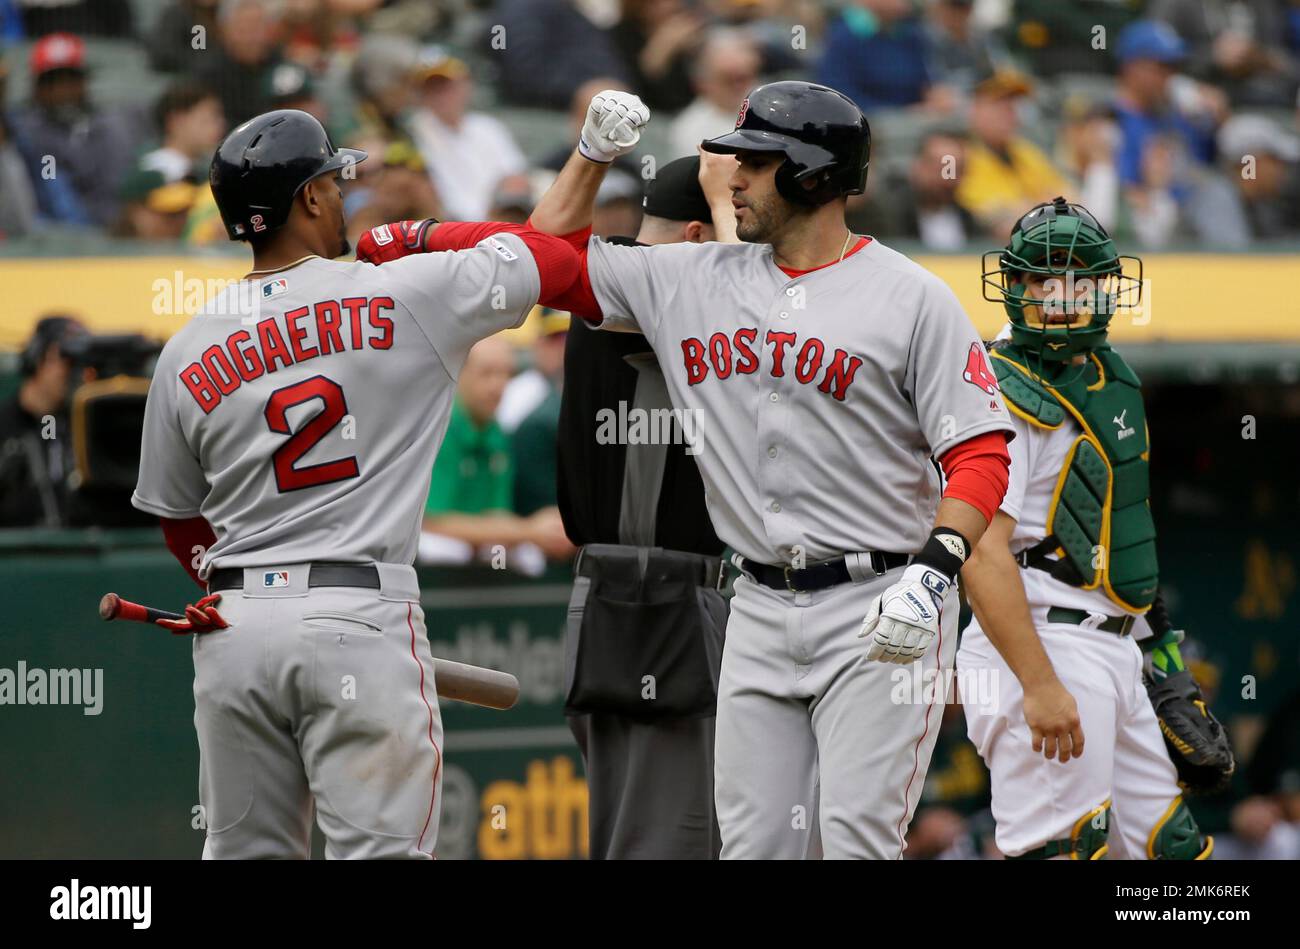 Boston Red Sox's J.D. Martinez, right, is greeted by Xander